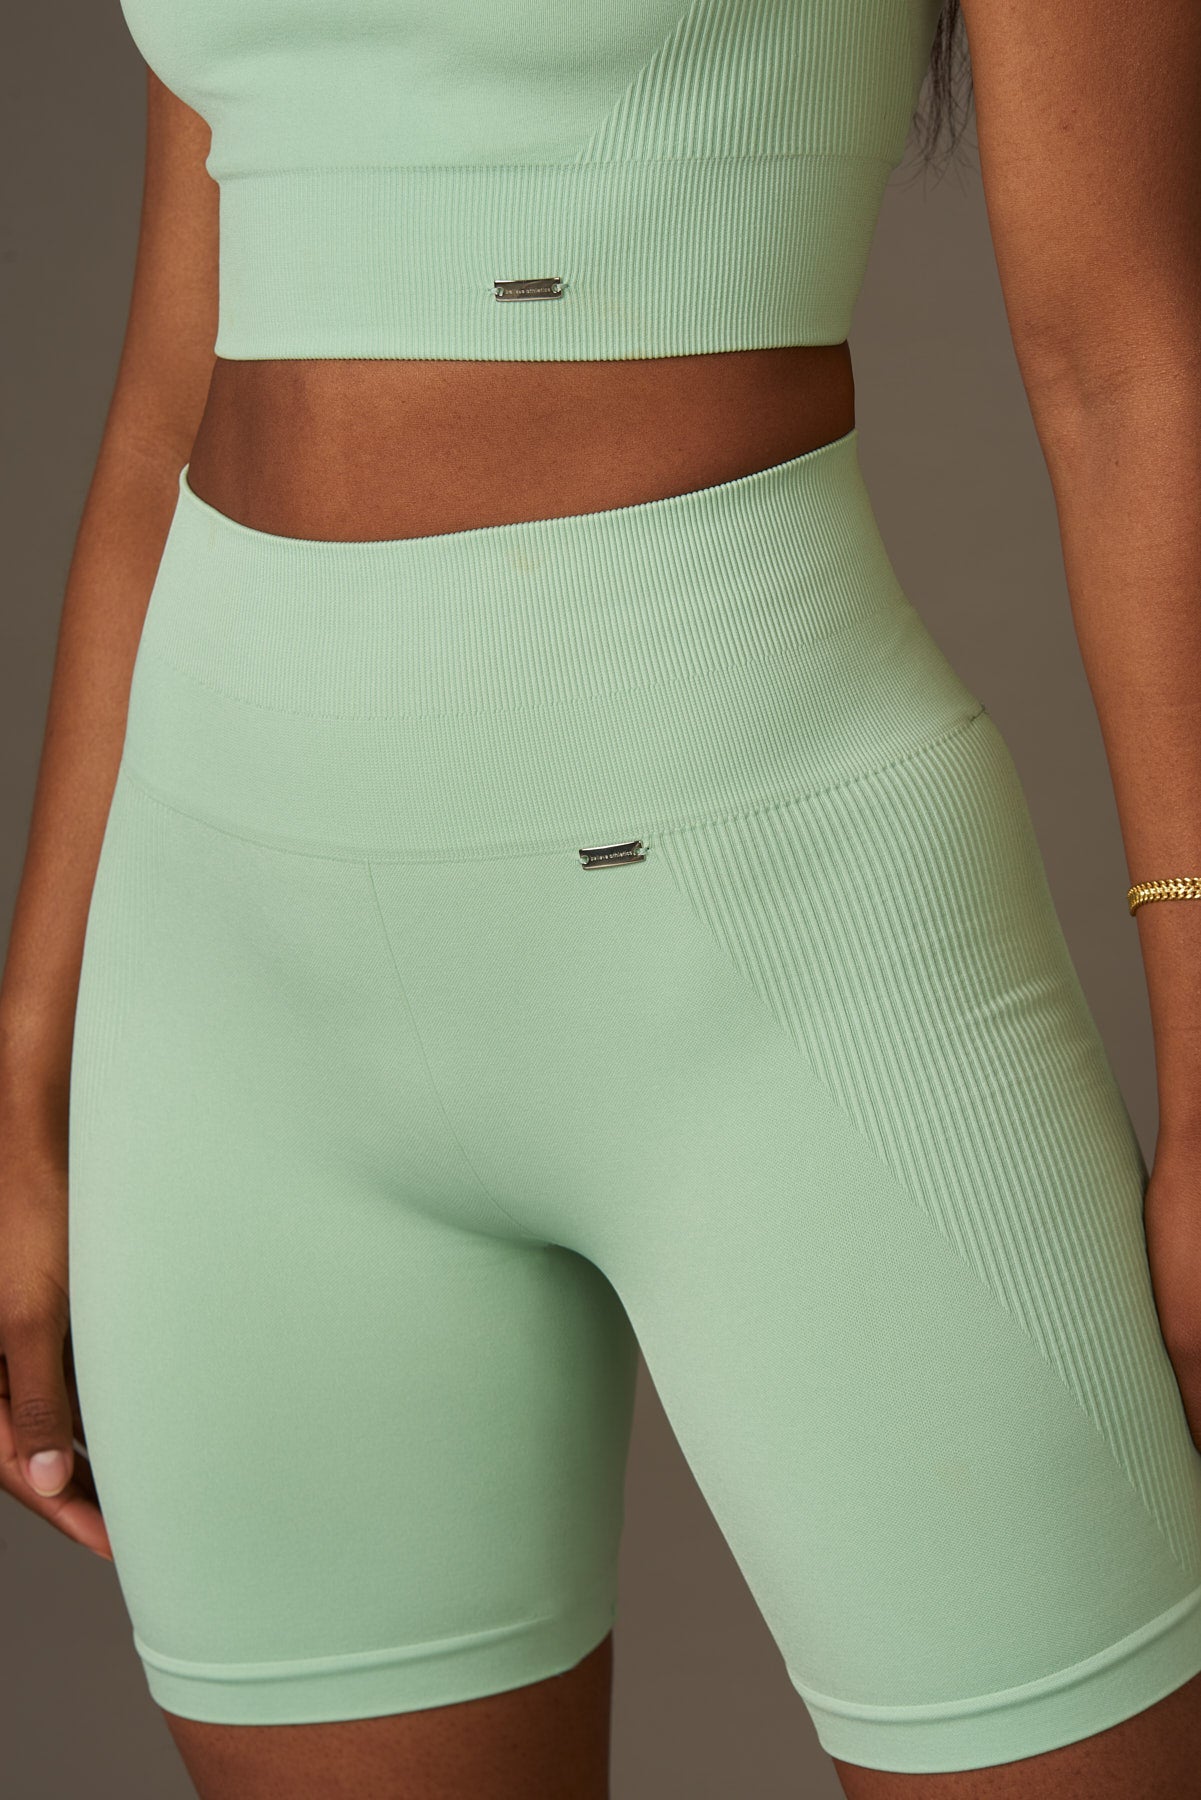 Bliss Biker Push-Up en Mojito-Bikers-Tienda Ropa Leggings Yoga Sostenibles Reciclados Mujer On-line Barcelona Believe Athletics Sustainable Recycled Yoga Clothes